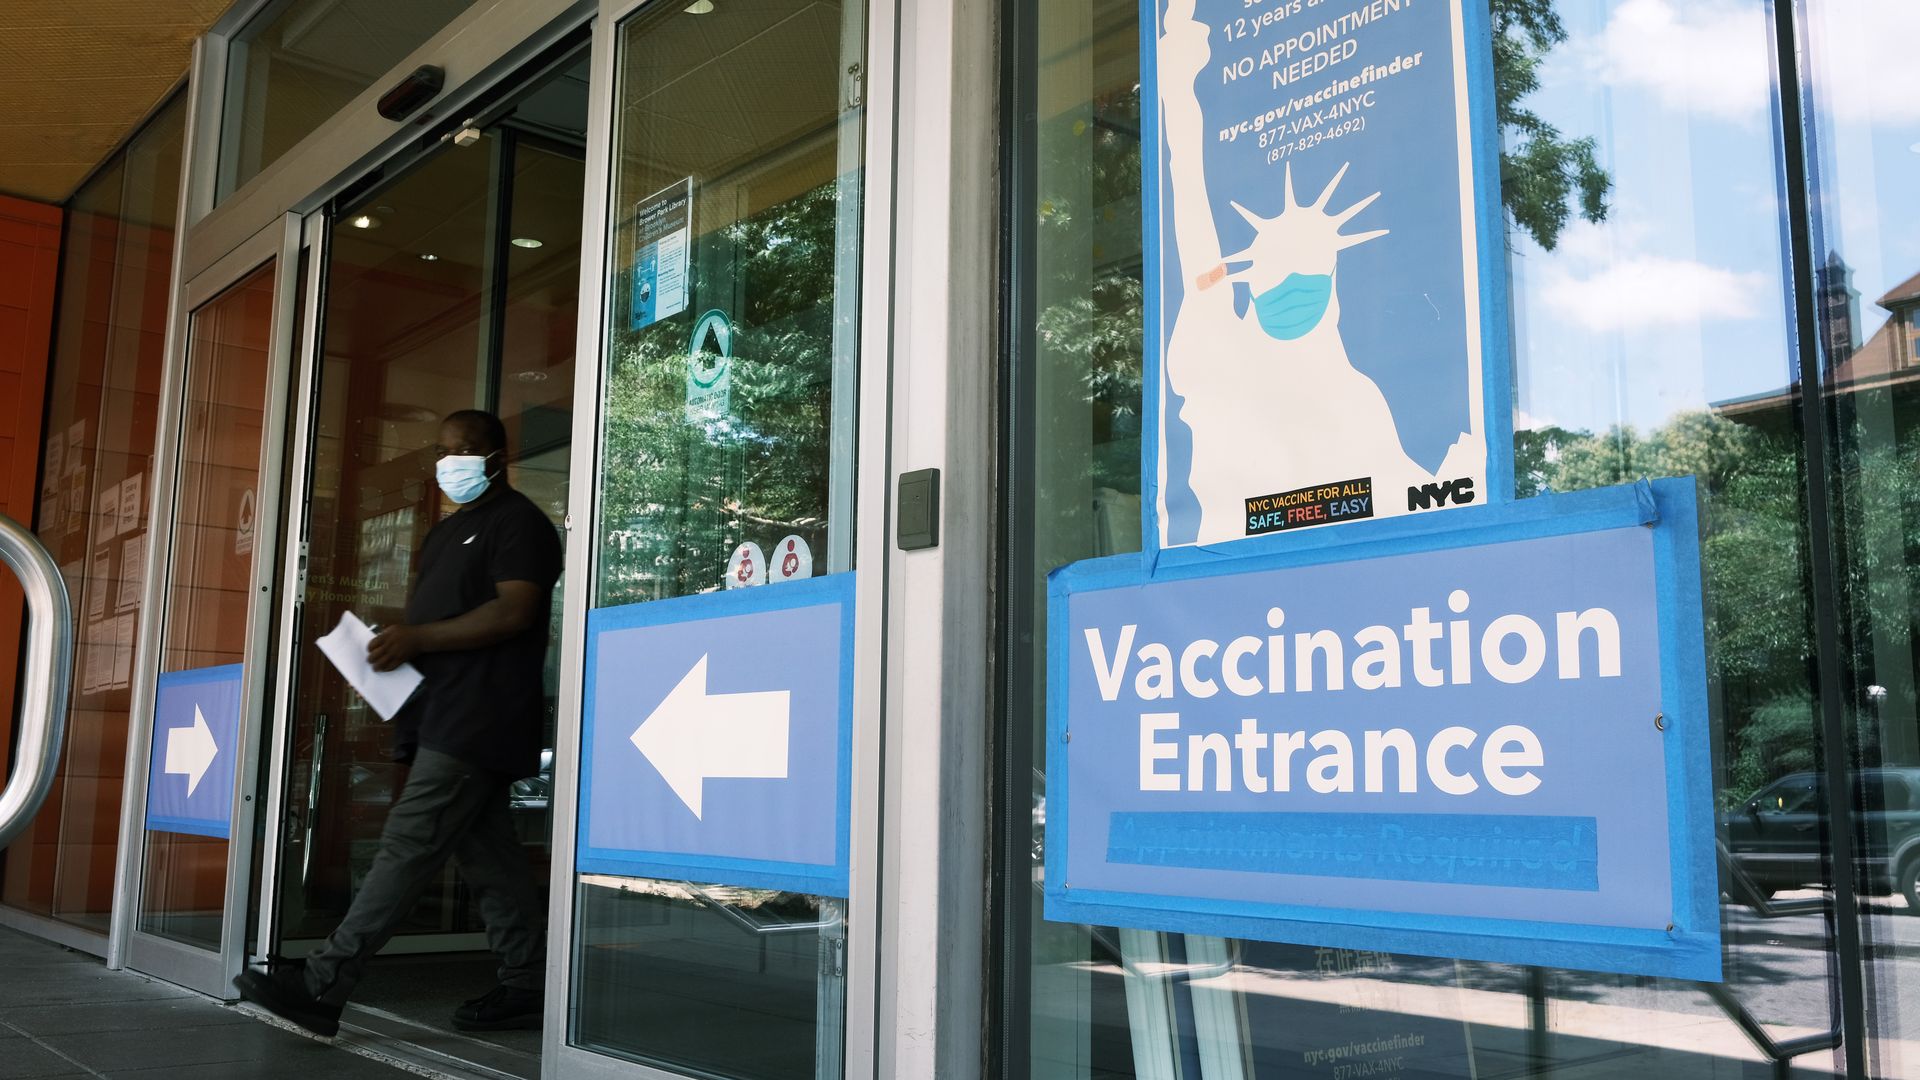 Photo of a sign that says "Vaccination entrance" and points to doors that are open as a man walks out